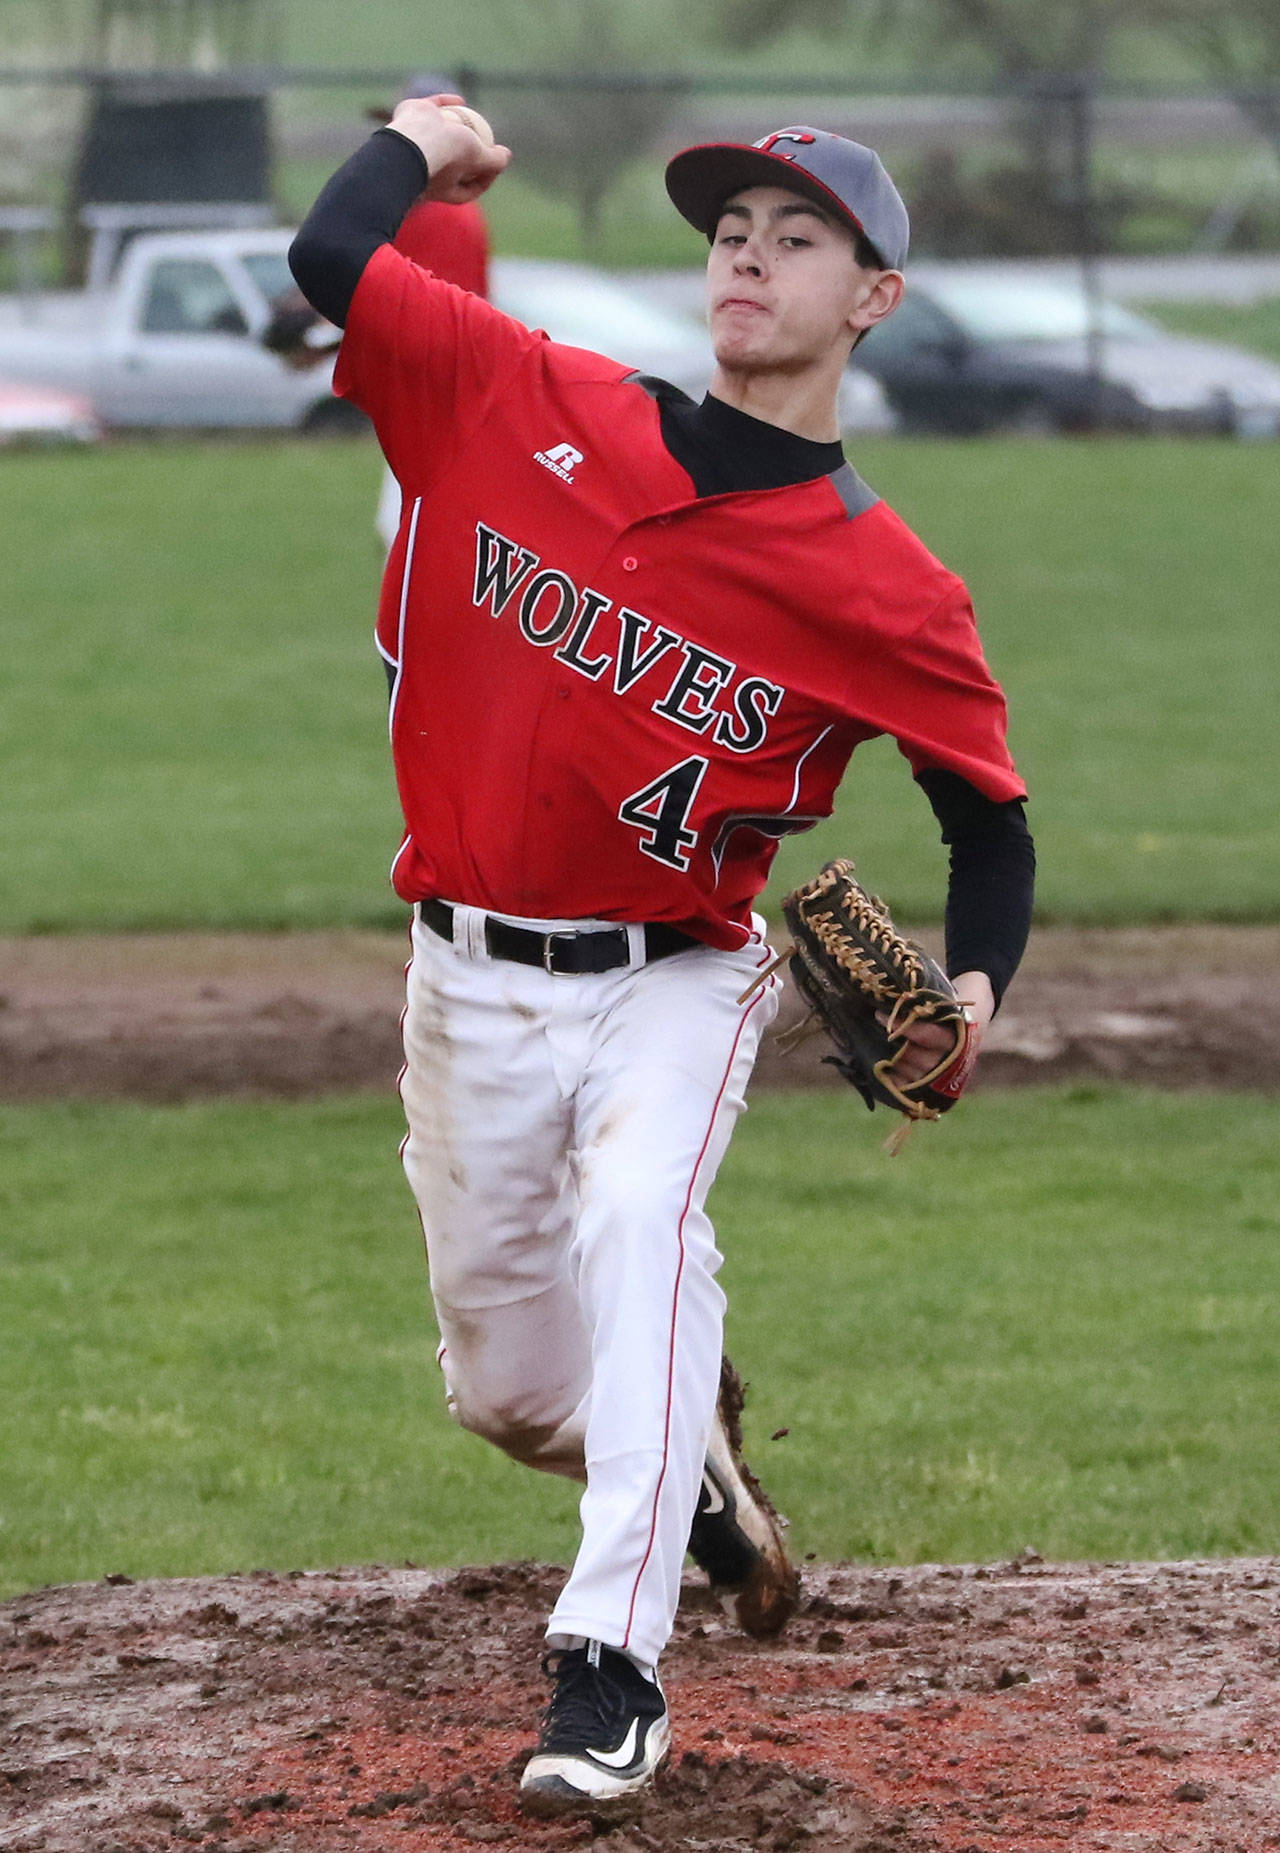 Hunter Smith earned first-team, all-league honors as a pitcher last year. (Photo by John Fisken)